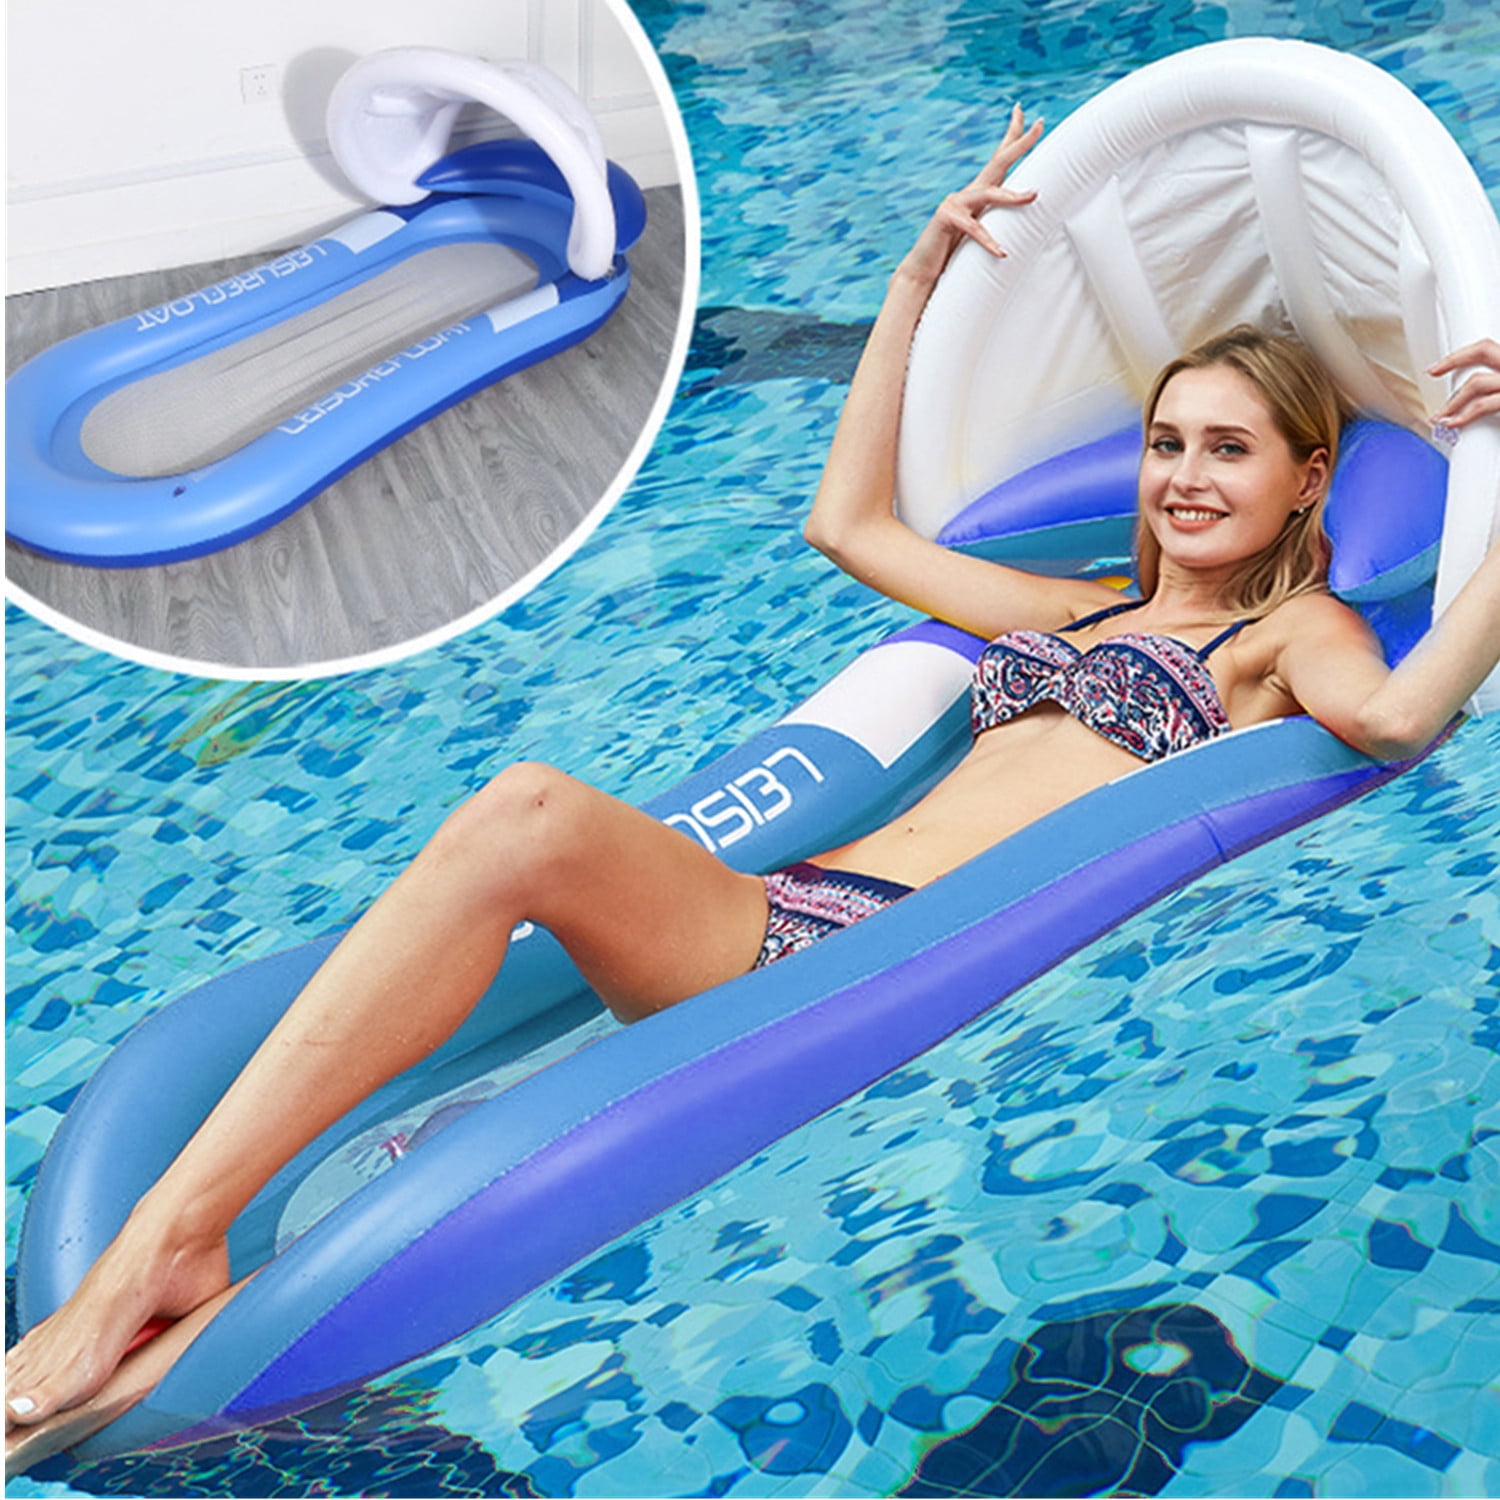 Log Rafts to Float Toys Adult Children Pool Party Water Sports Games Inflatable Floating Row Toys Set 2 Pcs Lightweight and Portable Easy to Play Anytime Anywhere